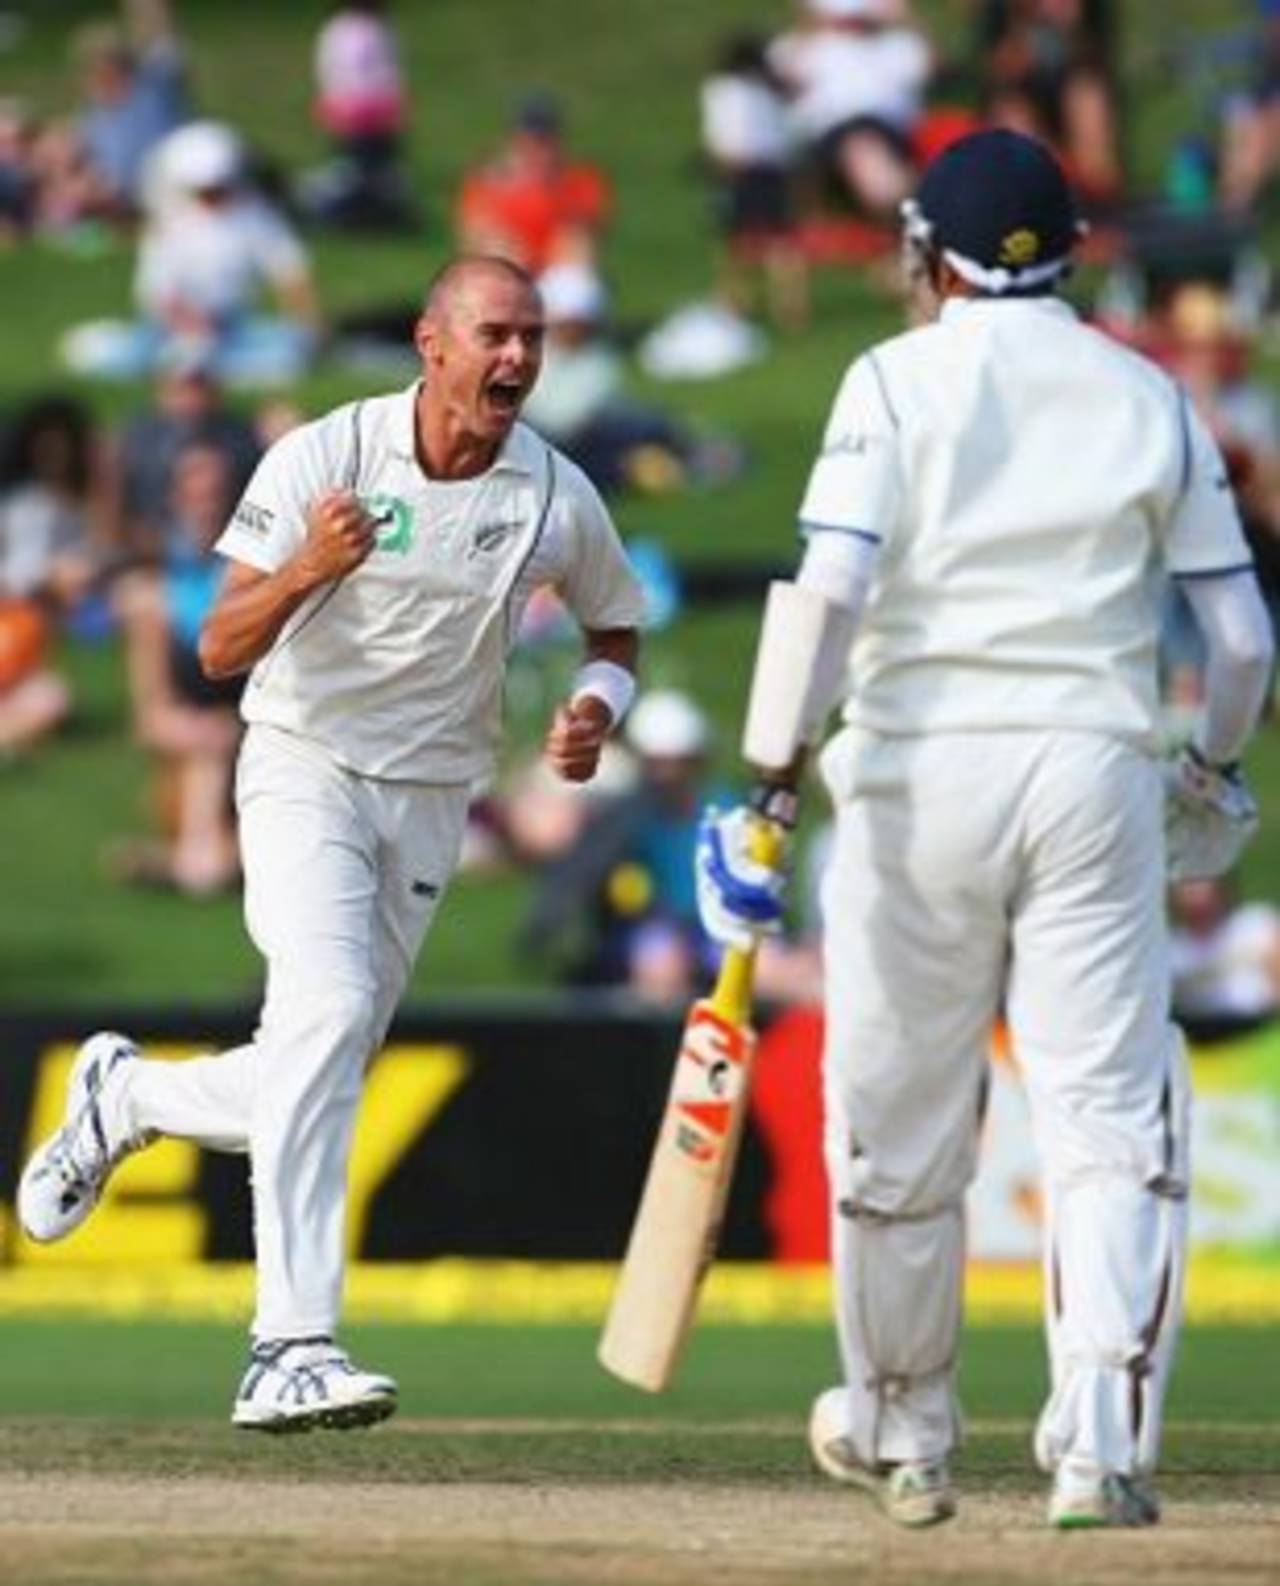 Chris Martin is charged up after removing VVS Laxman, New Zealand v India, 2nd Test, Napier, 3rd day, March 28, 2009